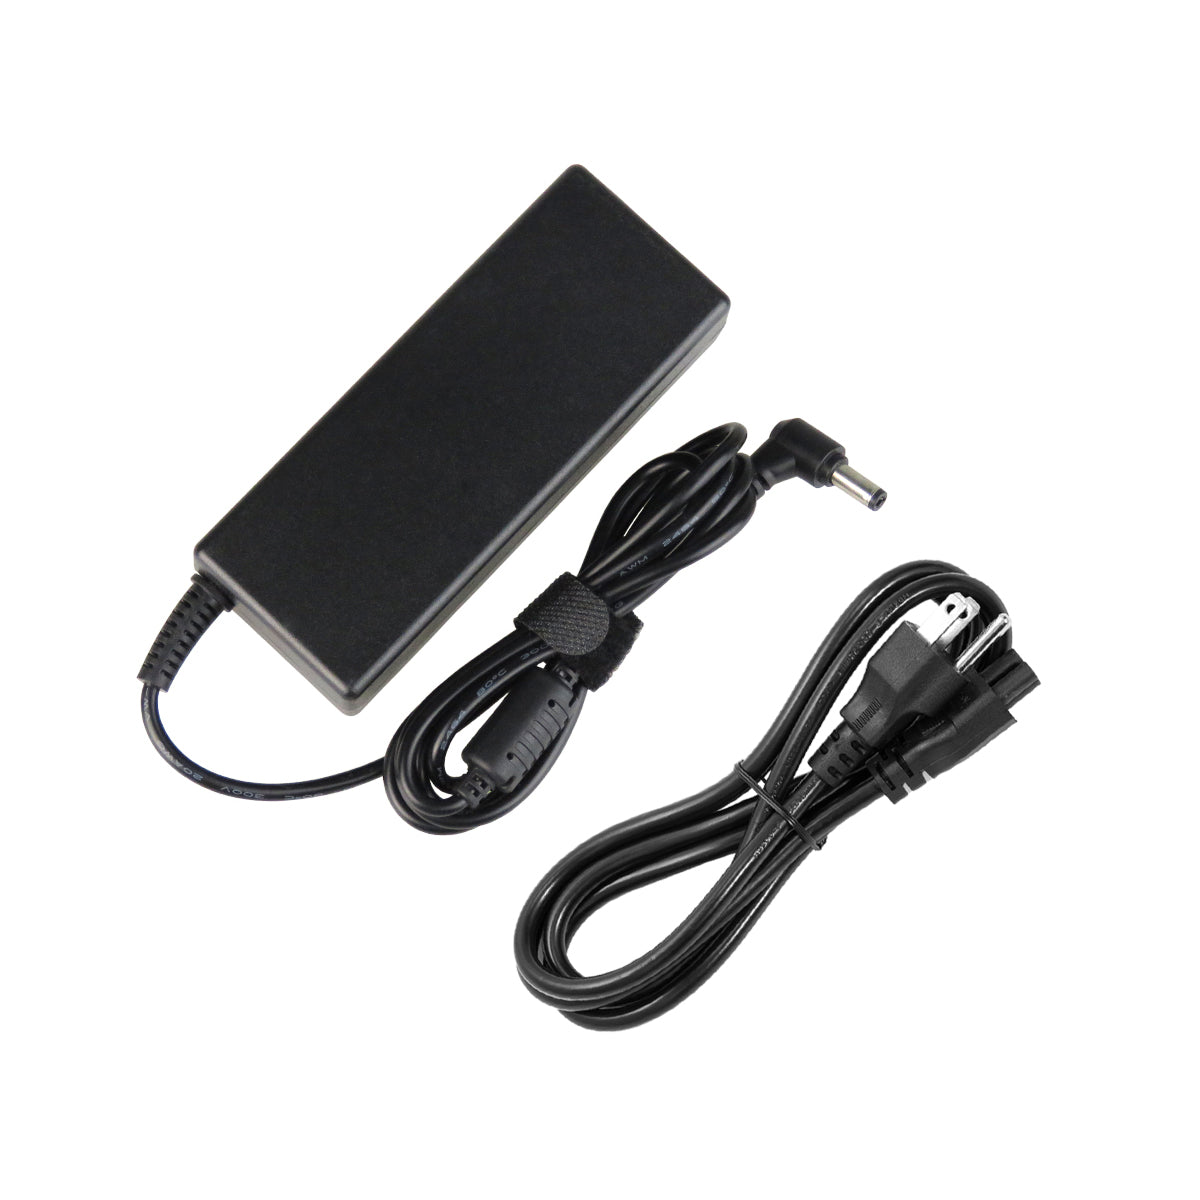 AC Adapter Charger for ASUS B53 Notebook.